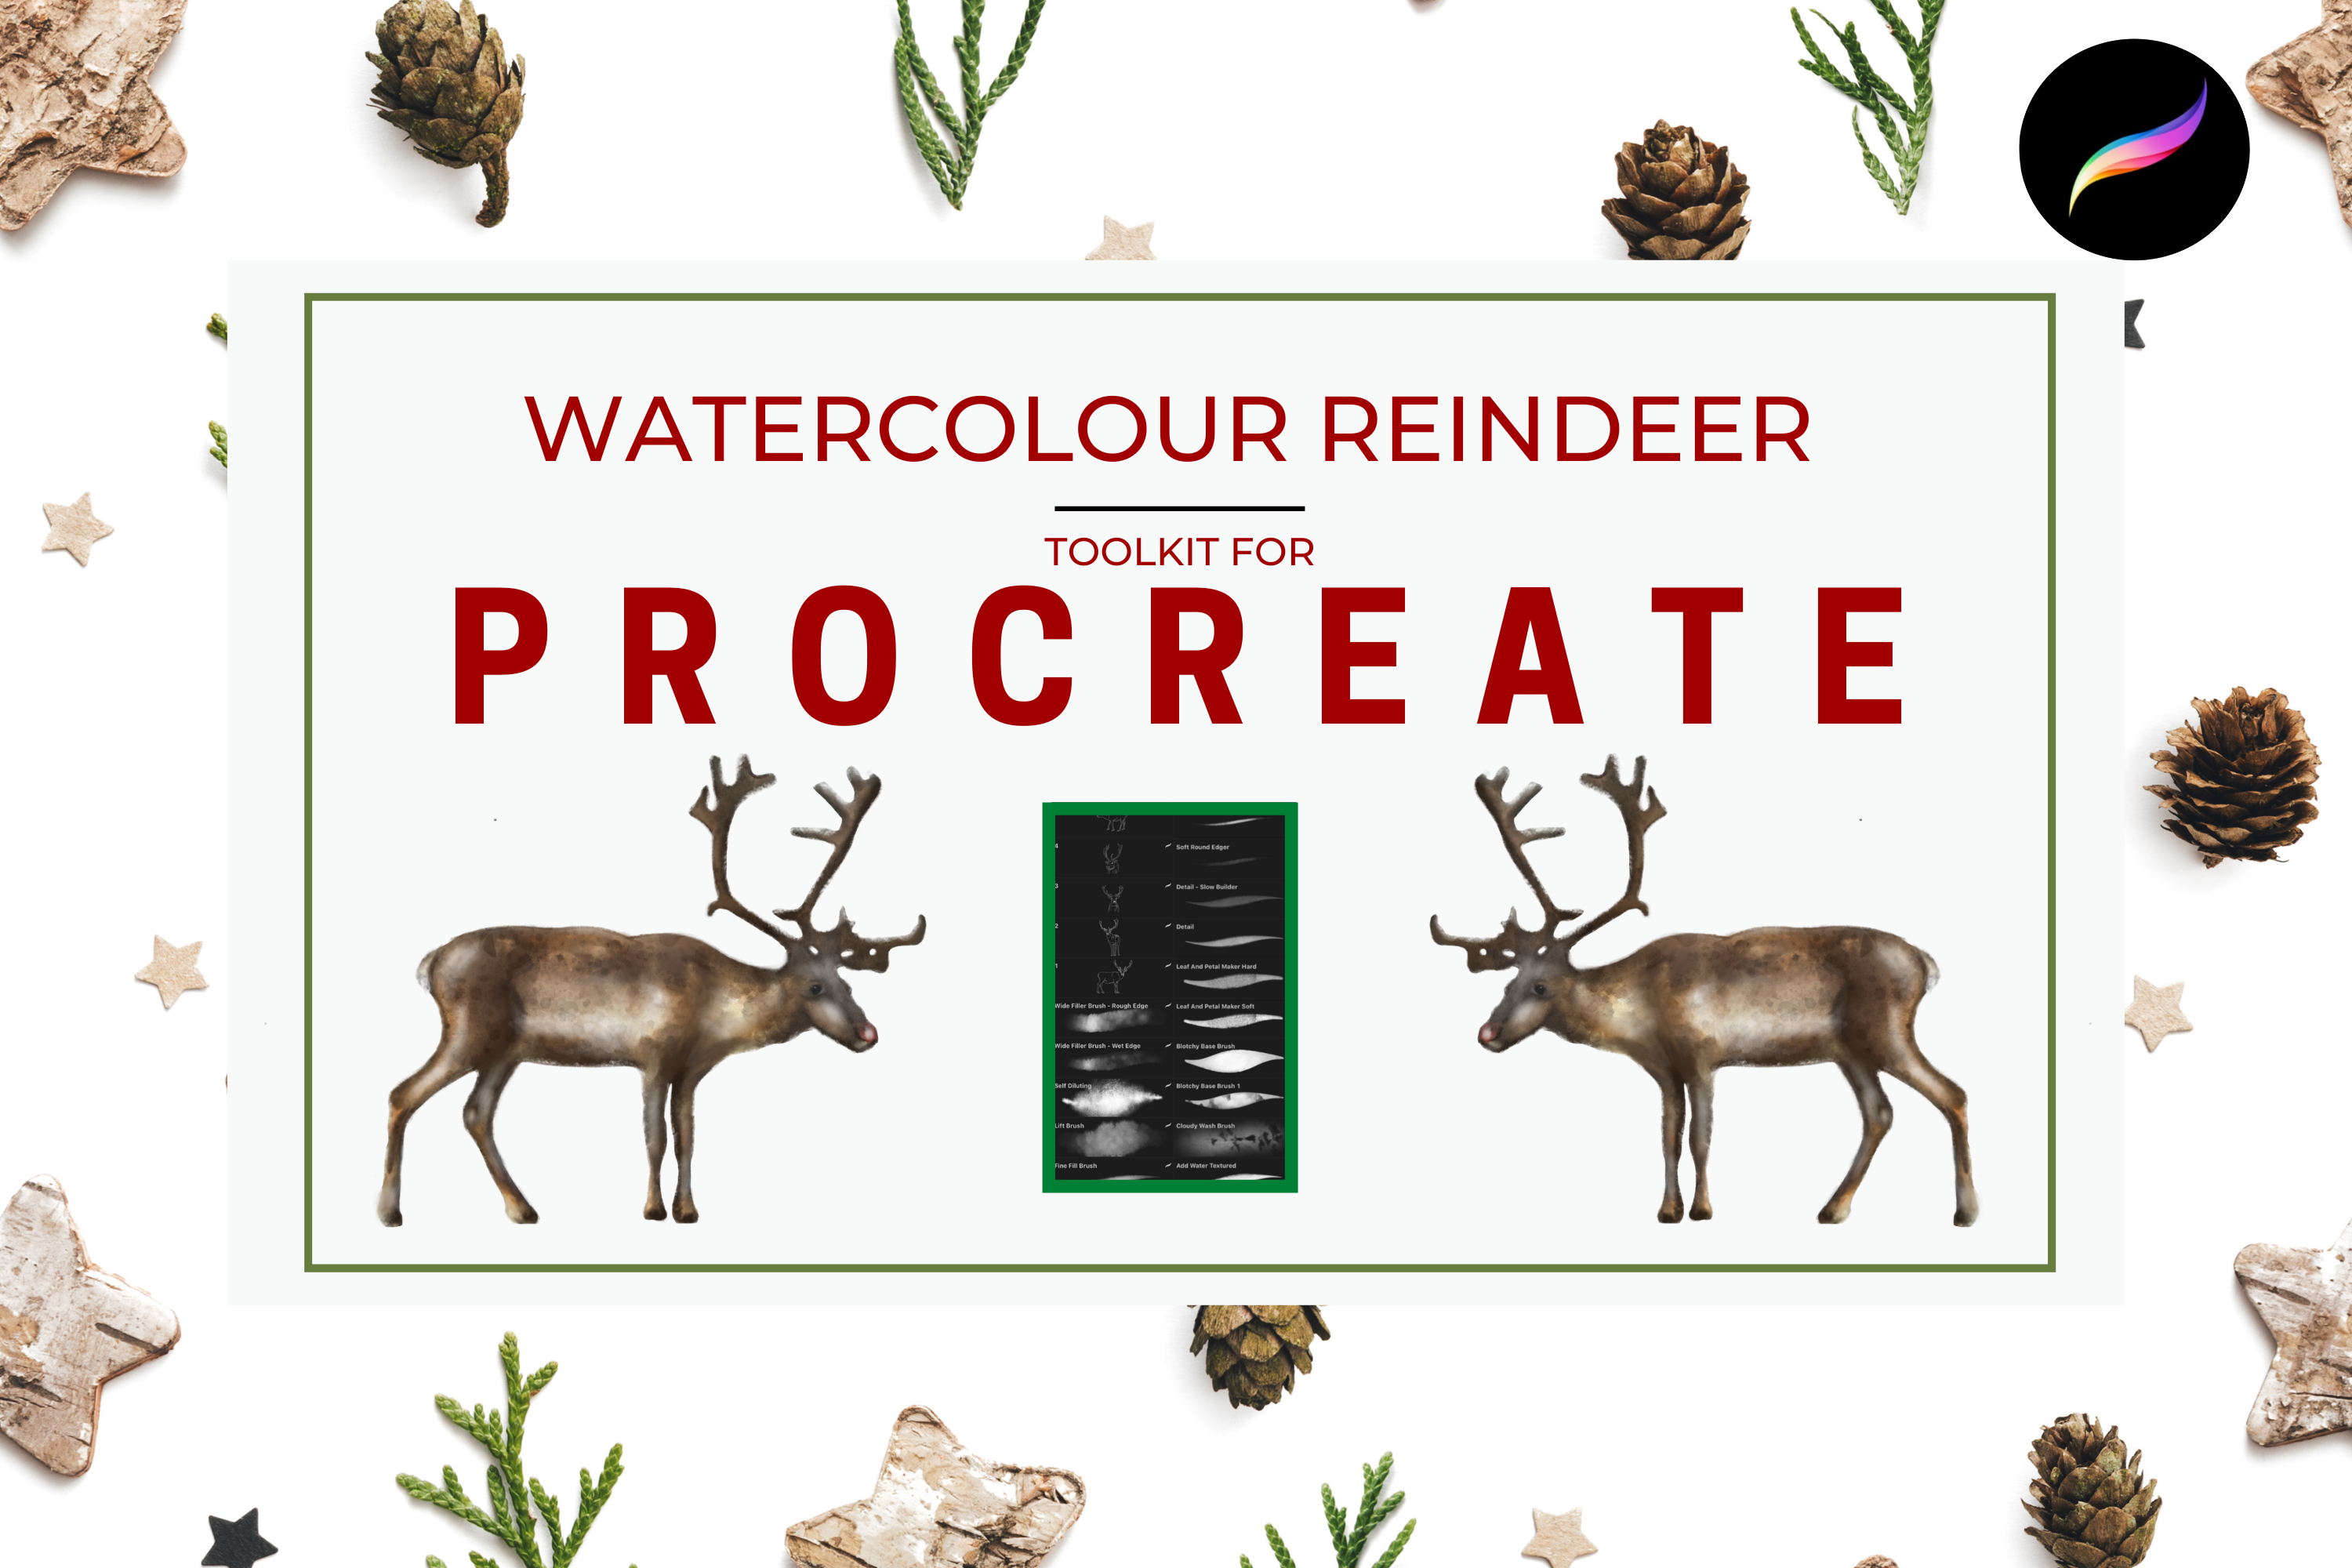 Reindeer Watercolour Toolkit for Procreate